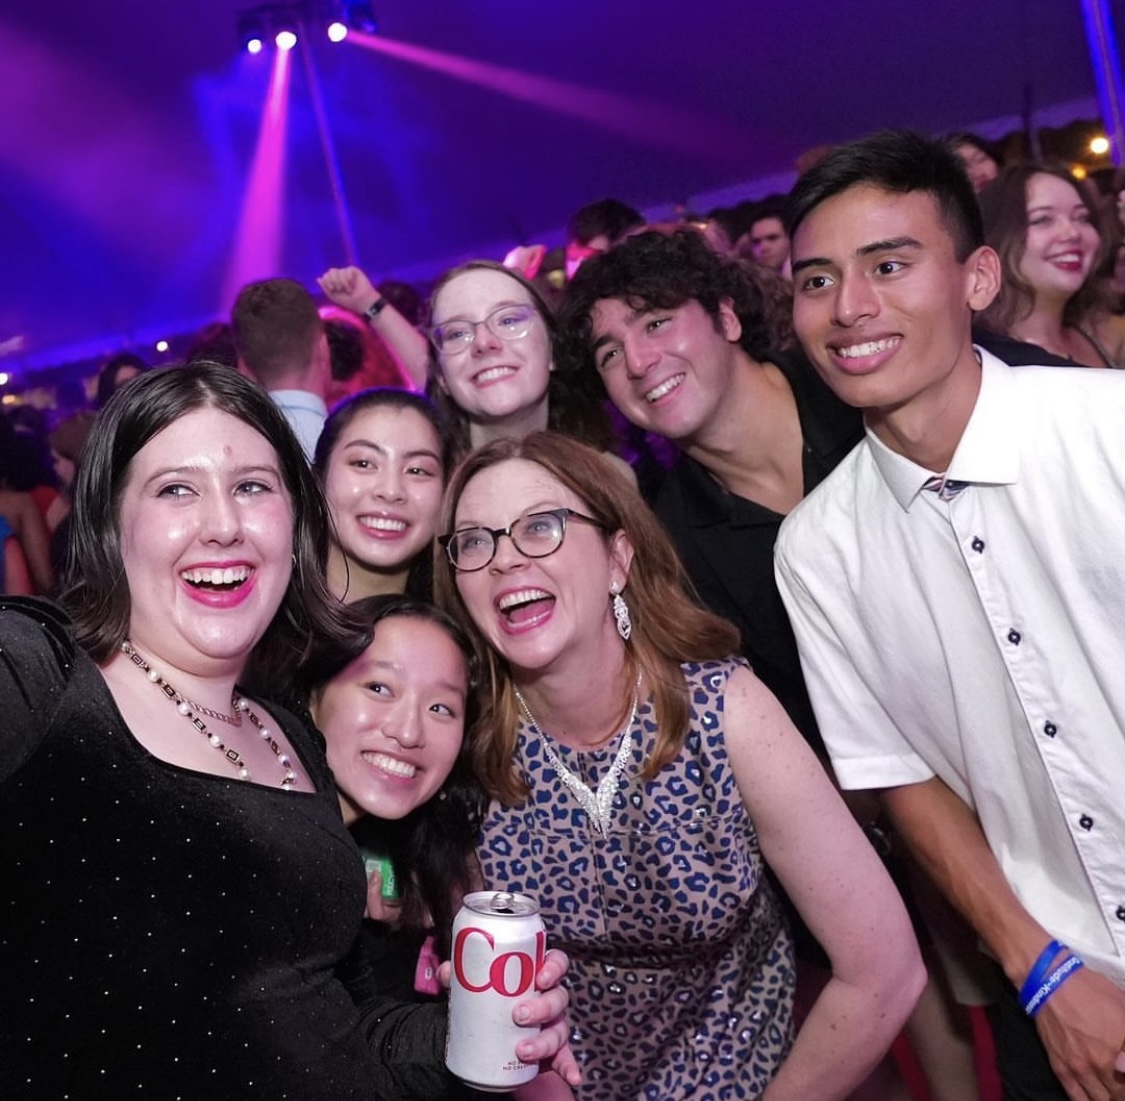 In celebration of Homecoming weekend, President Tania Tetlow danced with students at the annual President’s Ball on Friday evening. (Courtesy of Instagram)